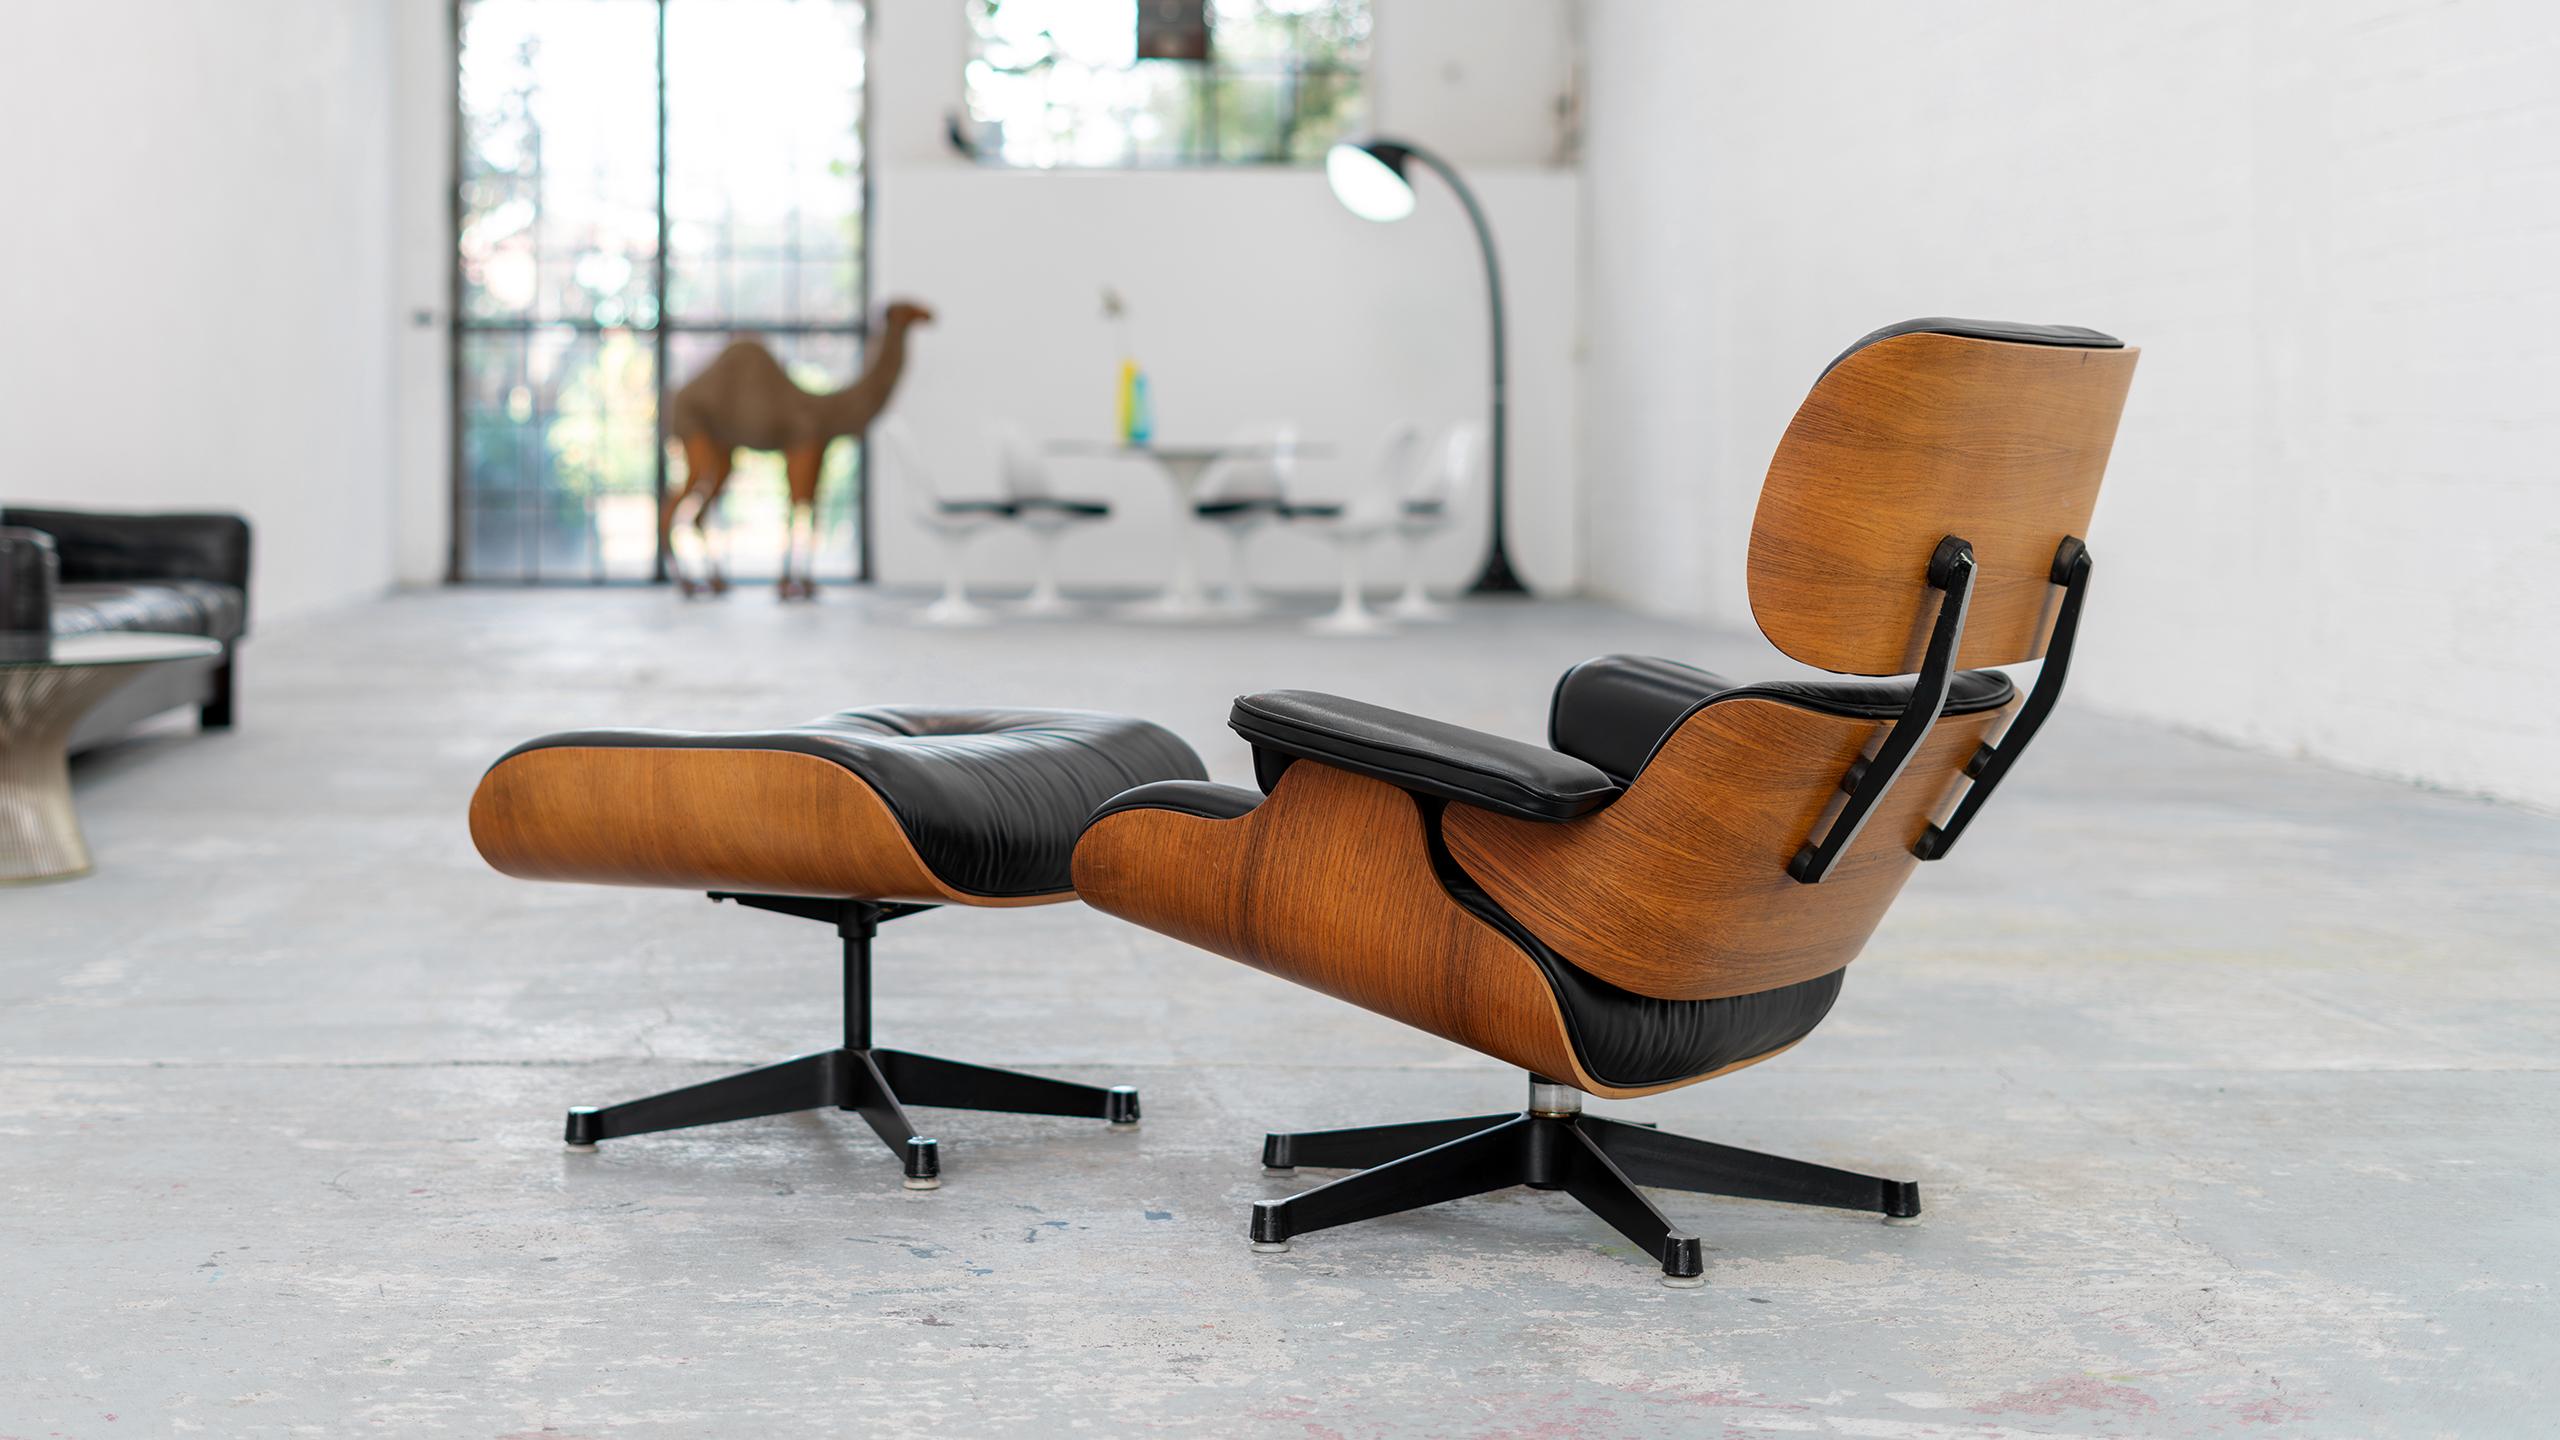 Charles & Ray Eames - Lounge Chair, 1957 by Fehlbaum & Contura - 1st Series 13